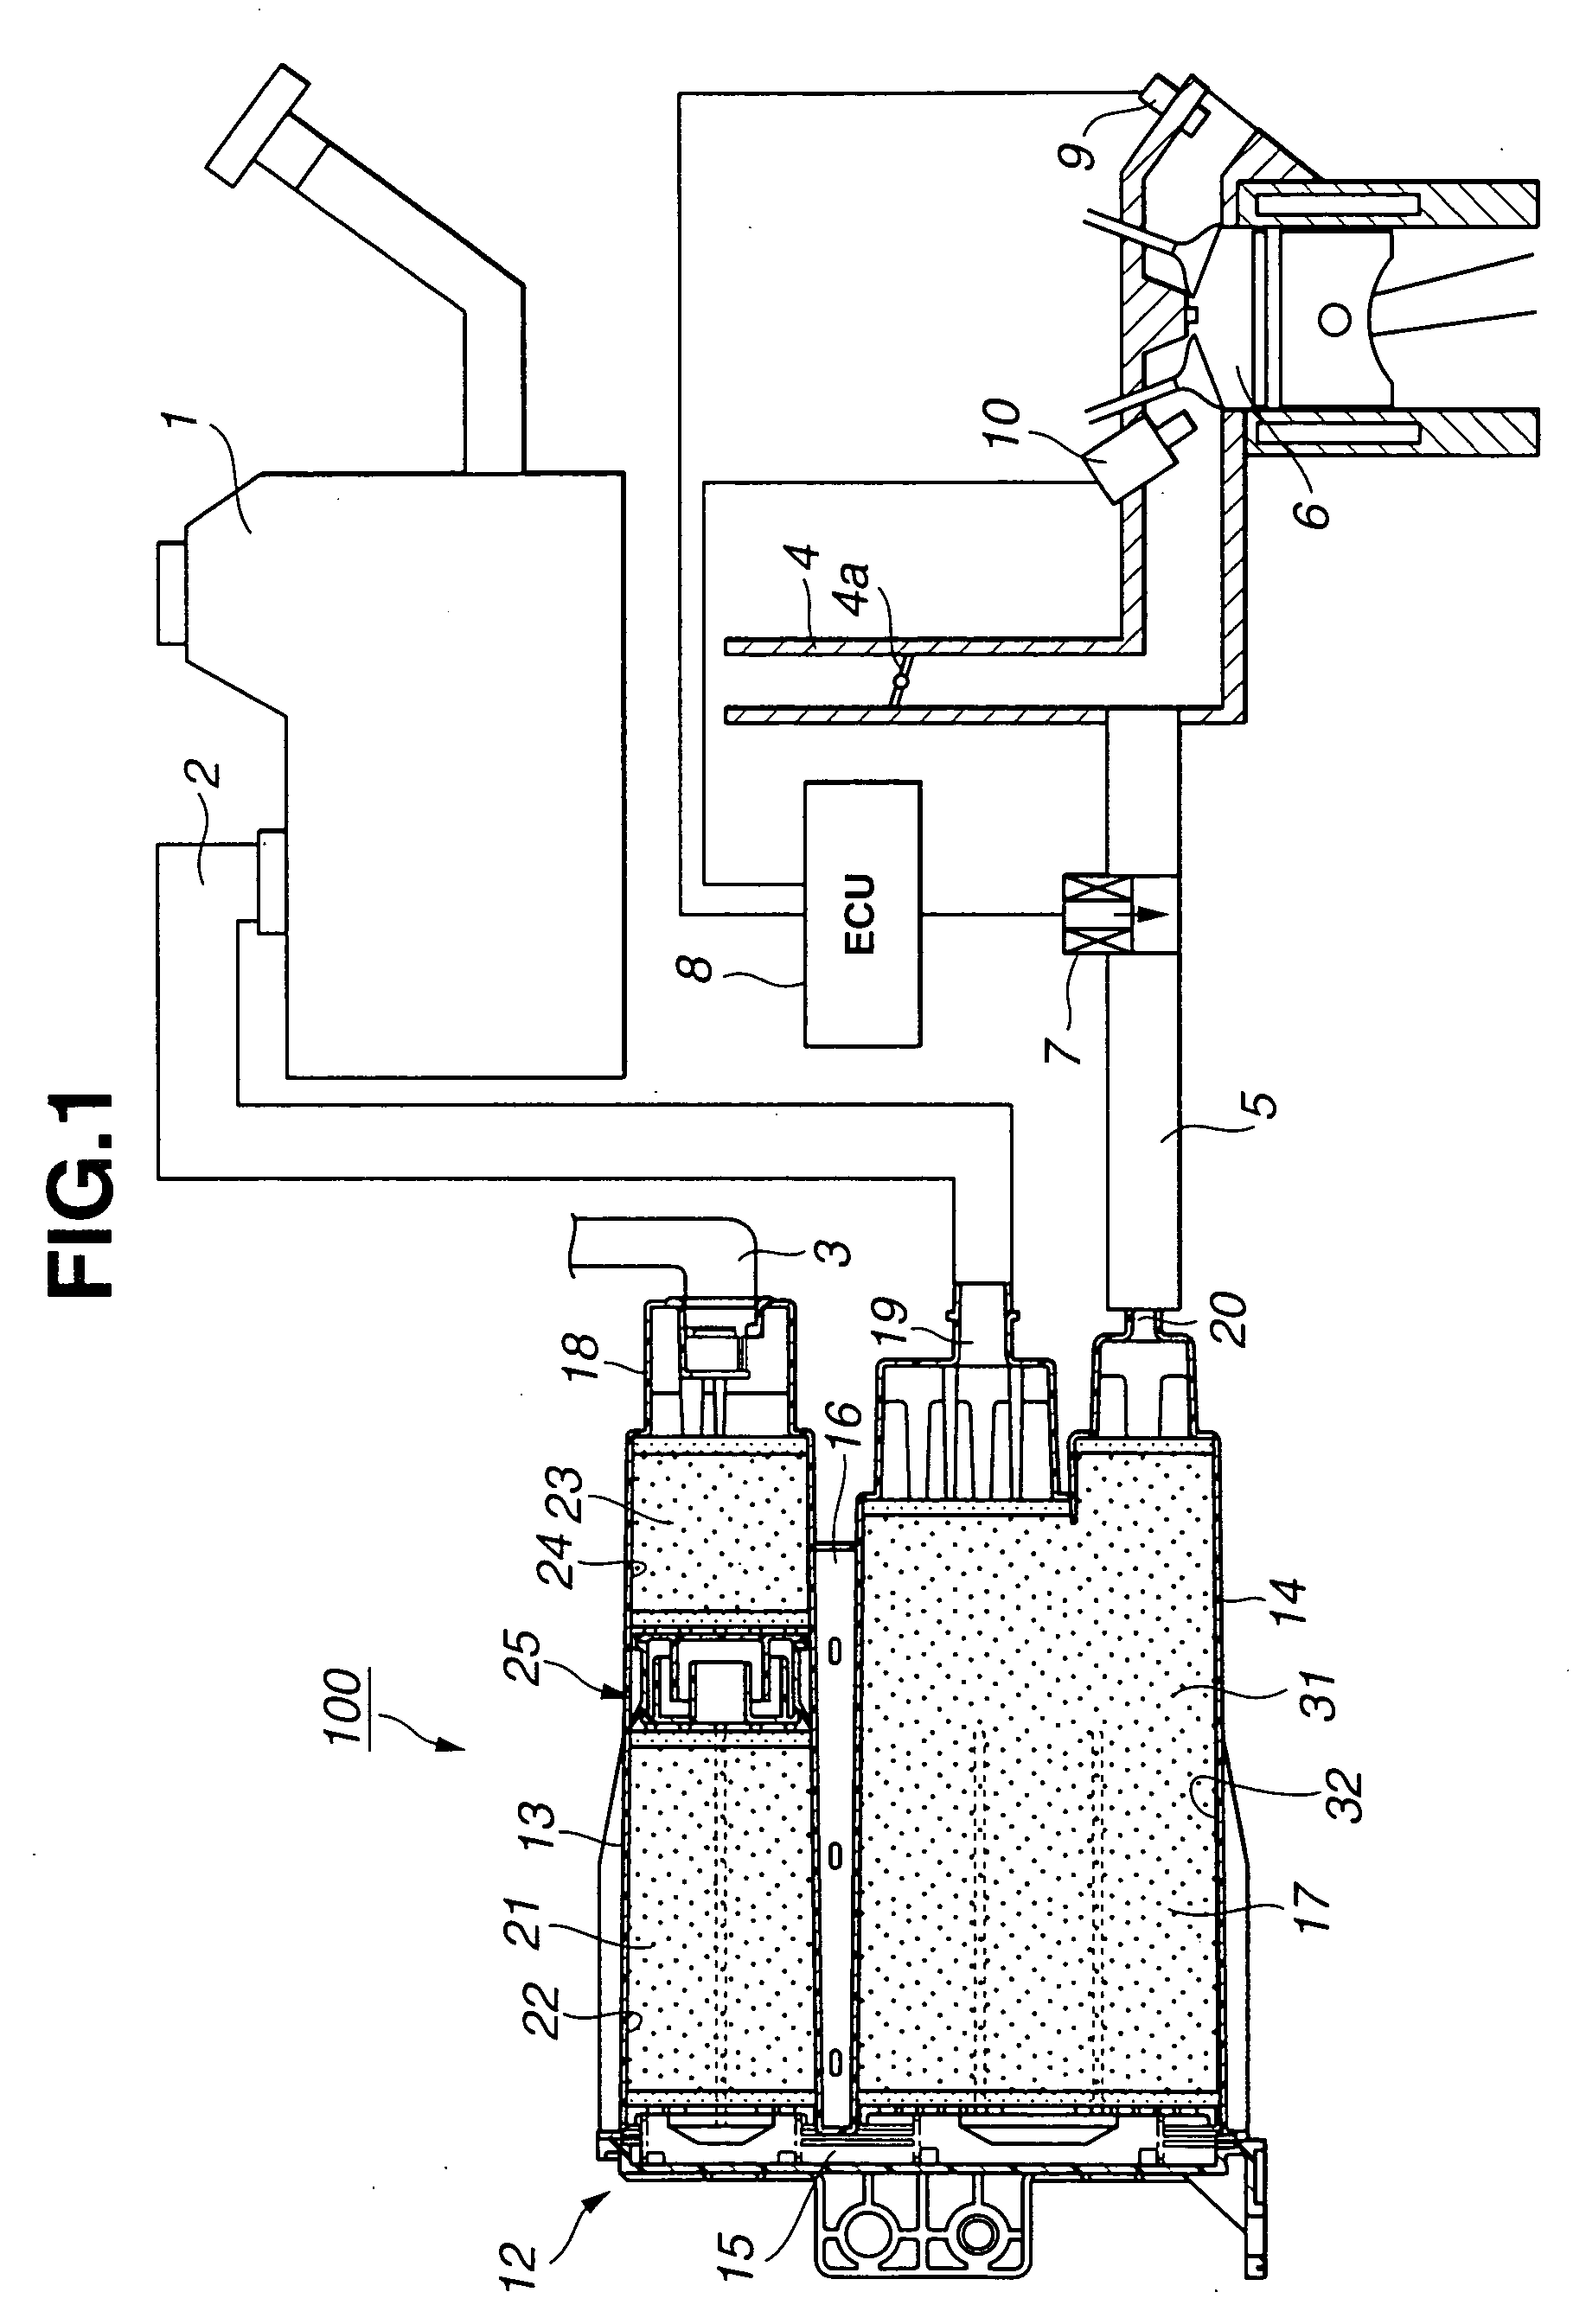 Carbon canister for use in evaporative emision control system of internal combustion engine